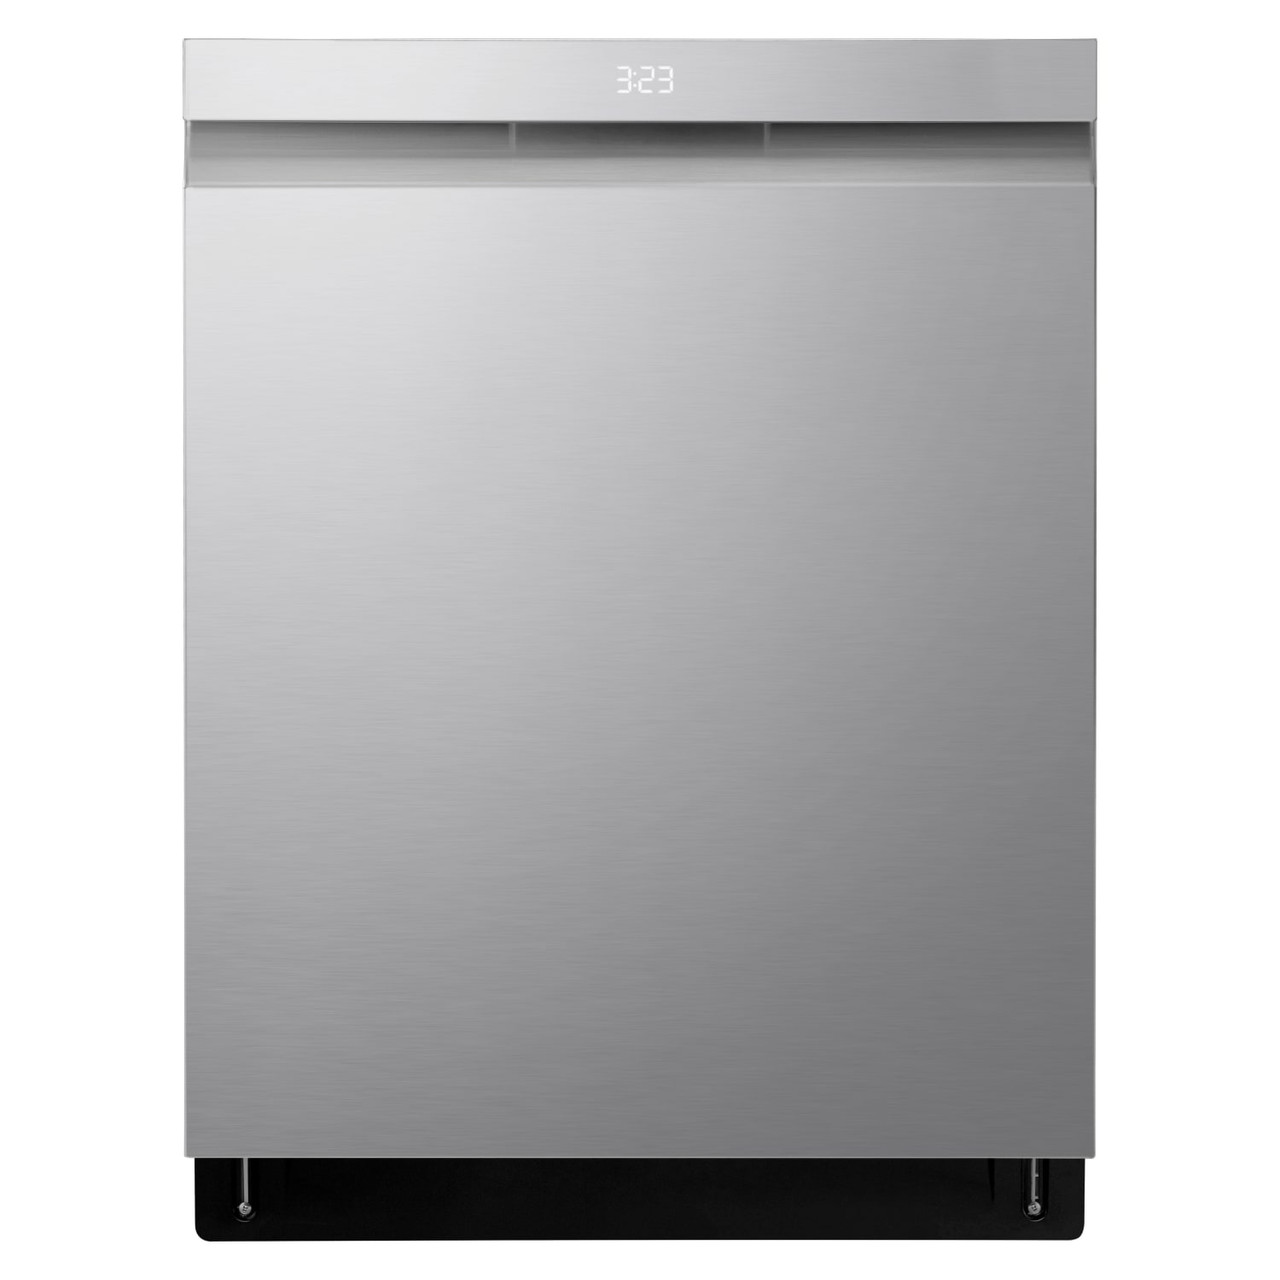 LG Smart Top Control Dishwasher with QuadWash® Pro, TrueSteam® and Dynamic Dry® - LDPS6762S